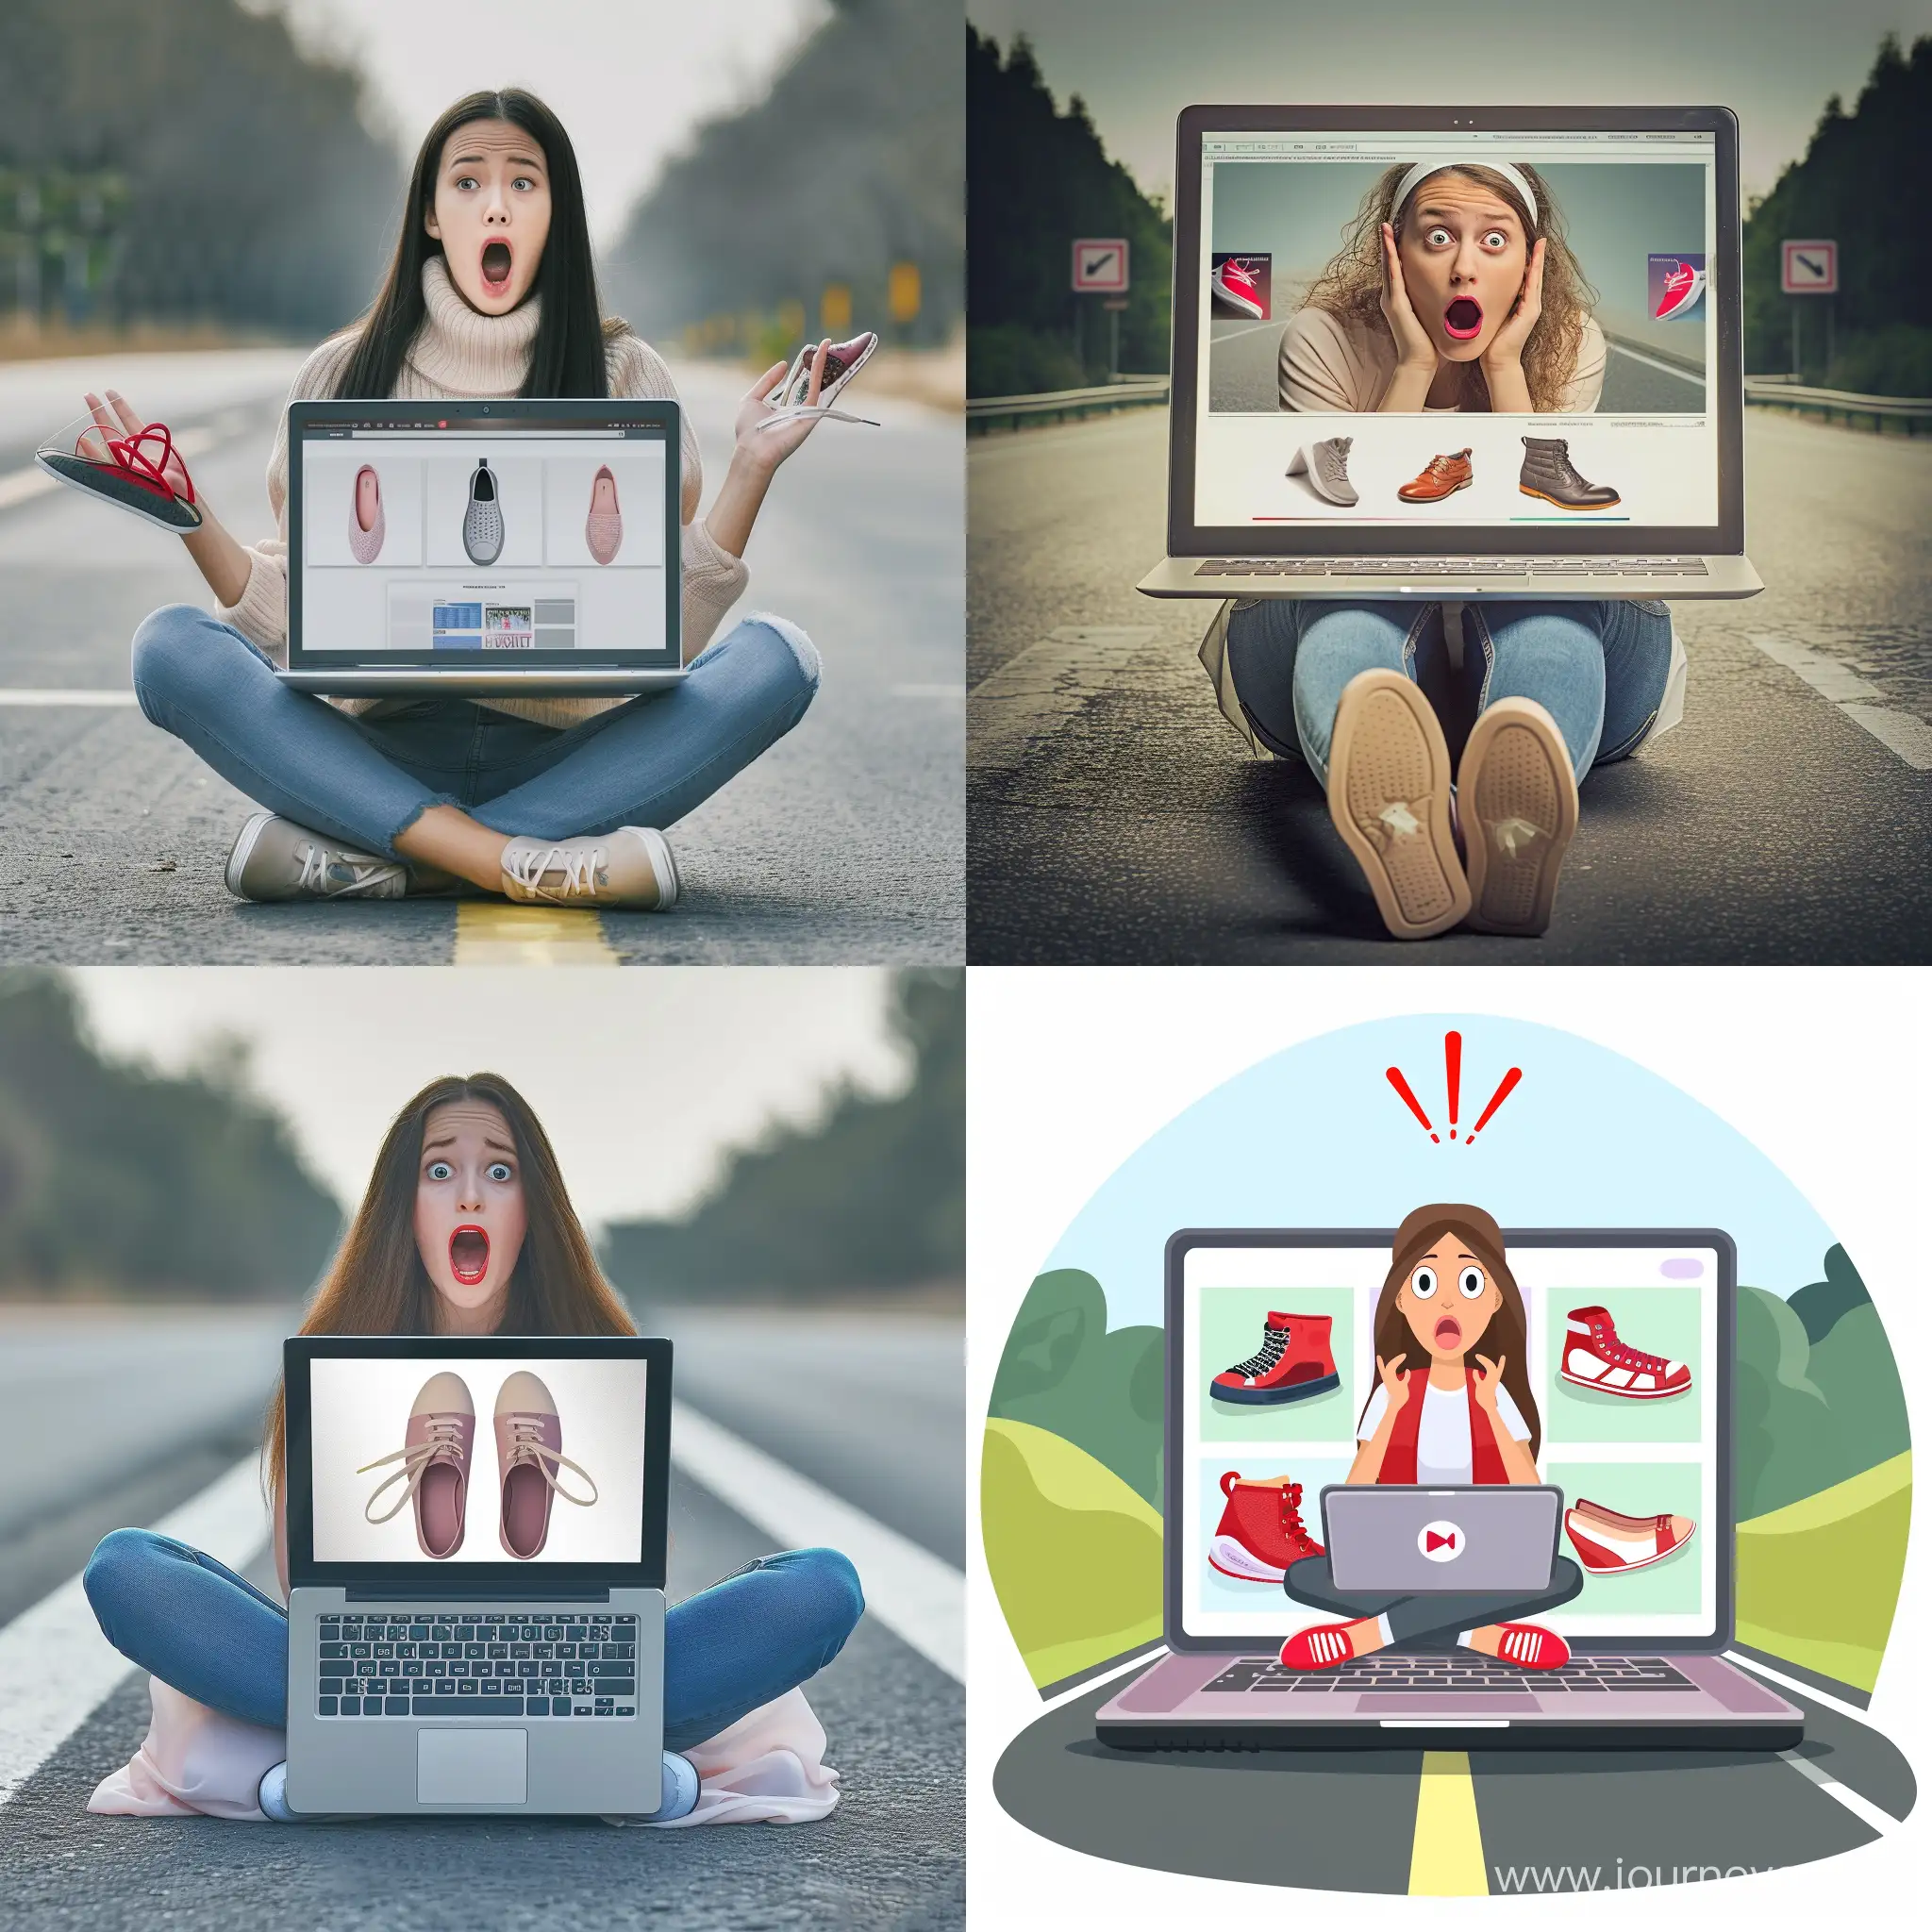 a girl sitting in road searching for a shoes on her big laptop and seeing the ads related to shoes on her screen being shocked